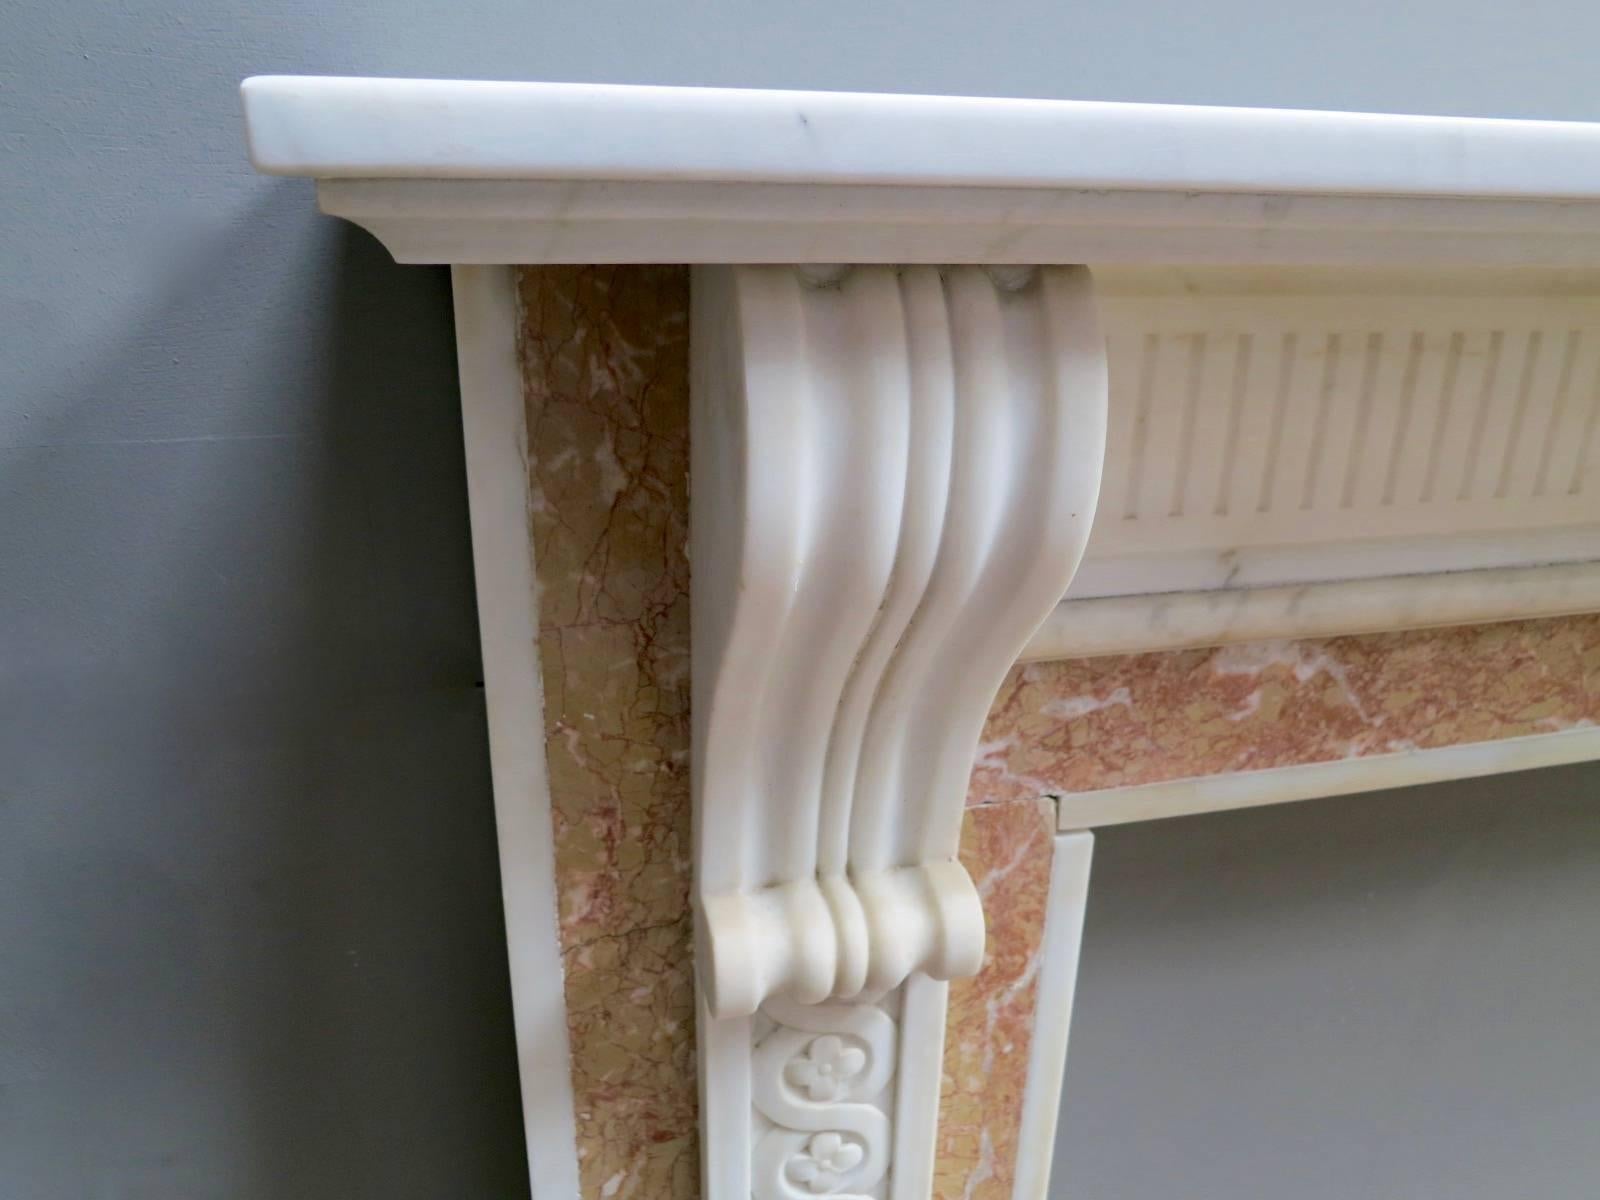 A late 19th century Georgian style fireplace in Statuary white marble and Brignoles marbles. The jambs with carved Guilloiche panels surmounted by carved corbel brackets, all in Statuary marble. The ingrounds and outgrounds in Brignoles. The stop